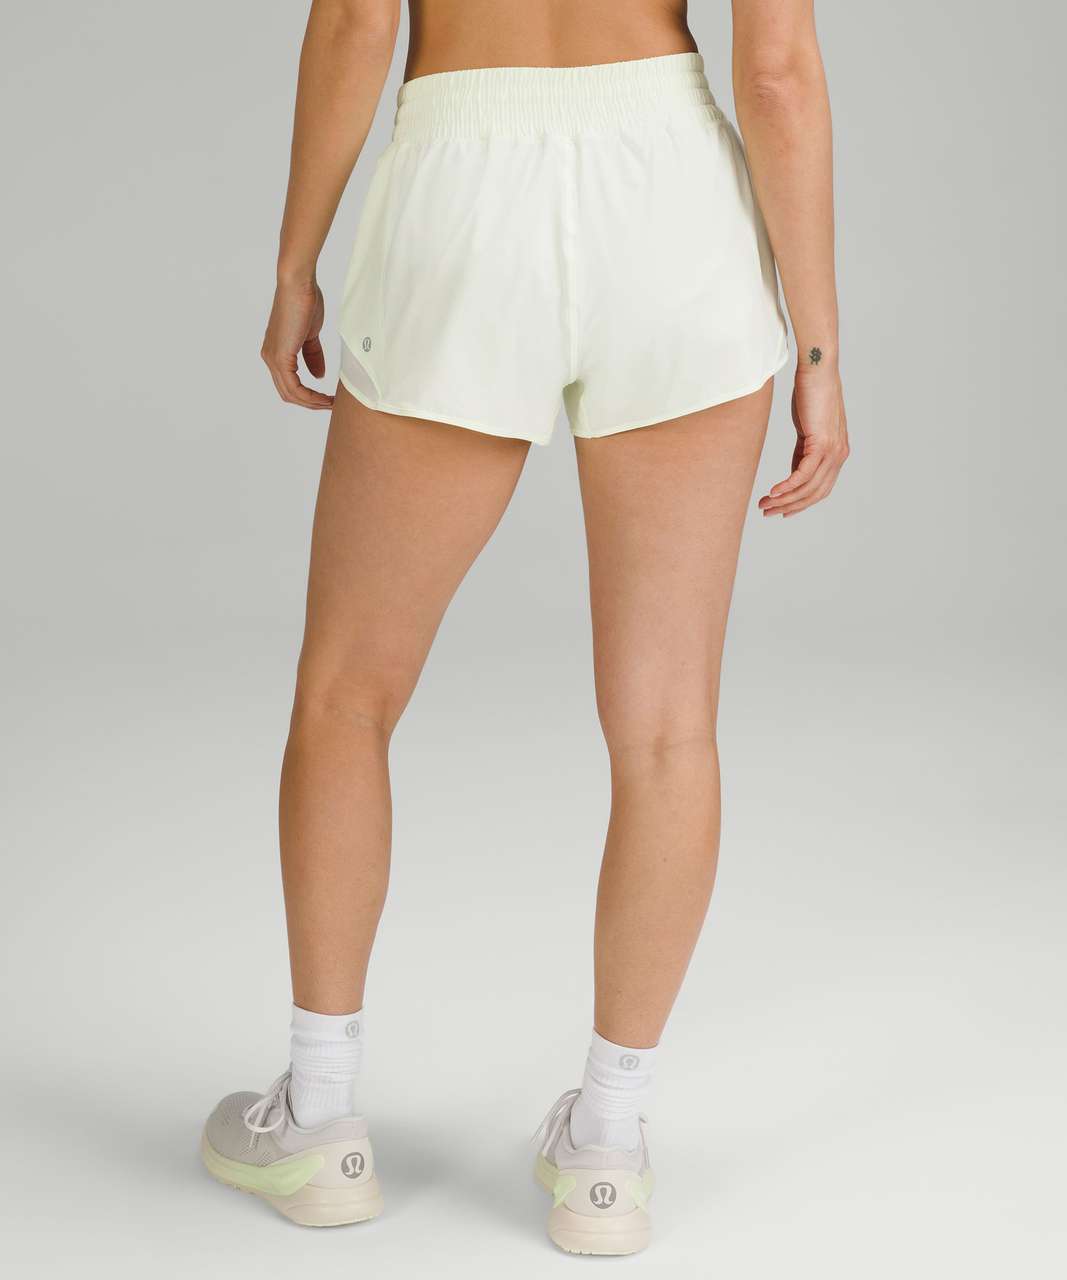 Lululemon Hotty Hot High-rise Lined Shorts 2.5 In Heritage 365